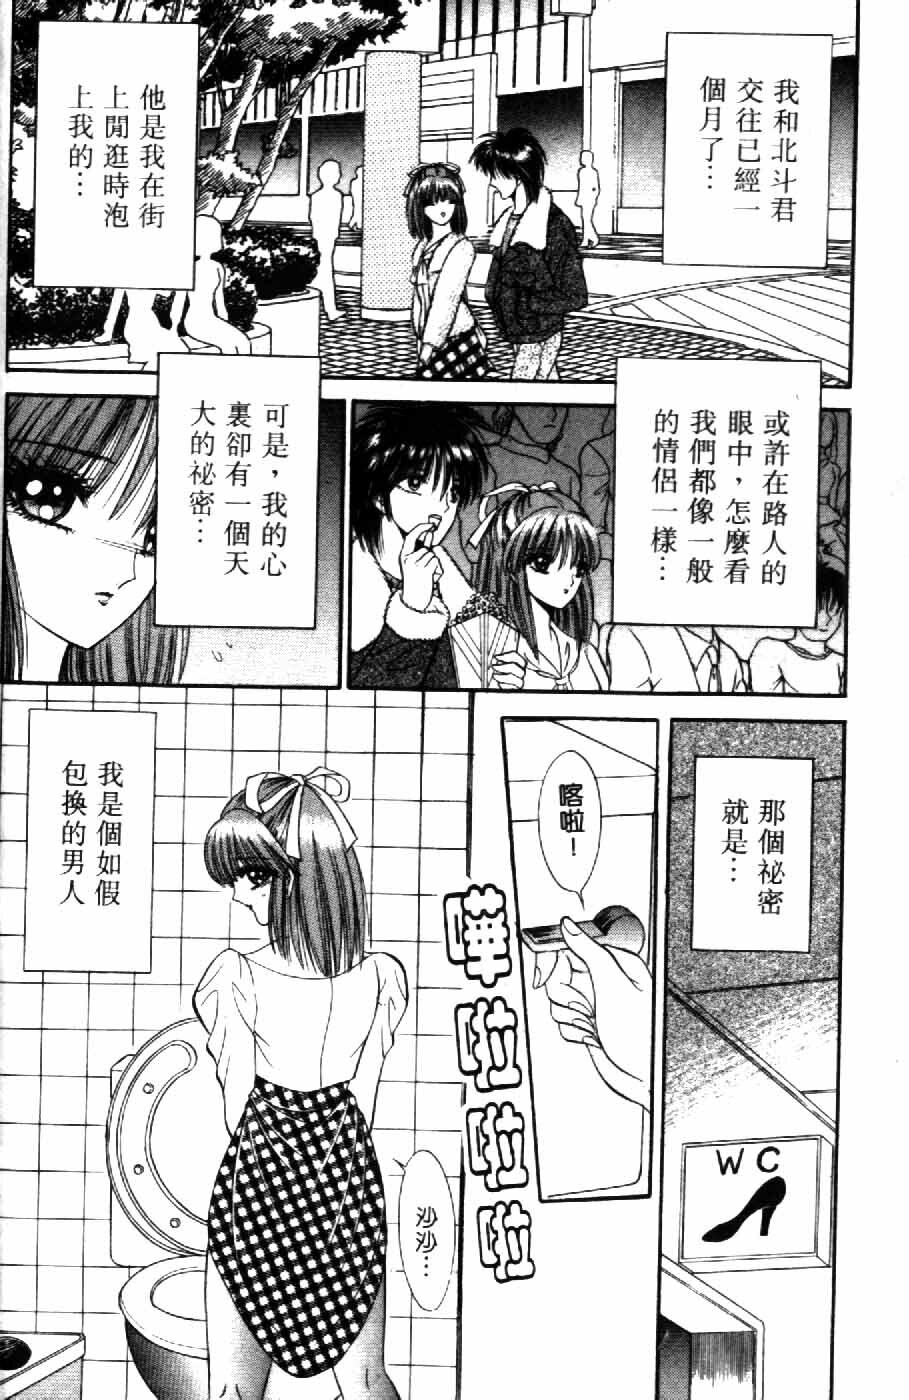 [Senno Knife] Ouma ga Horror Show 2 - Trans Sexual Special Show 2 | 顫慄博覽會 2 [Chinese] page 30 full